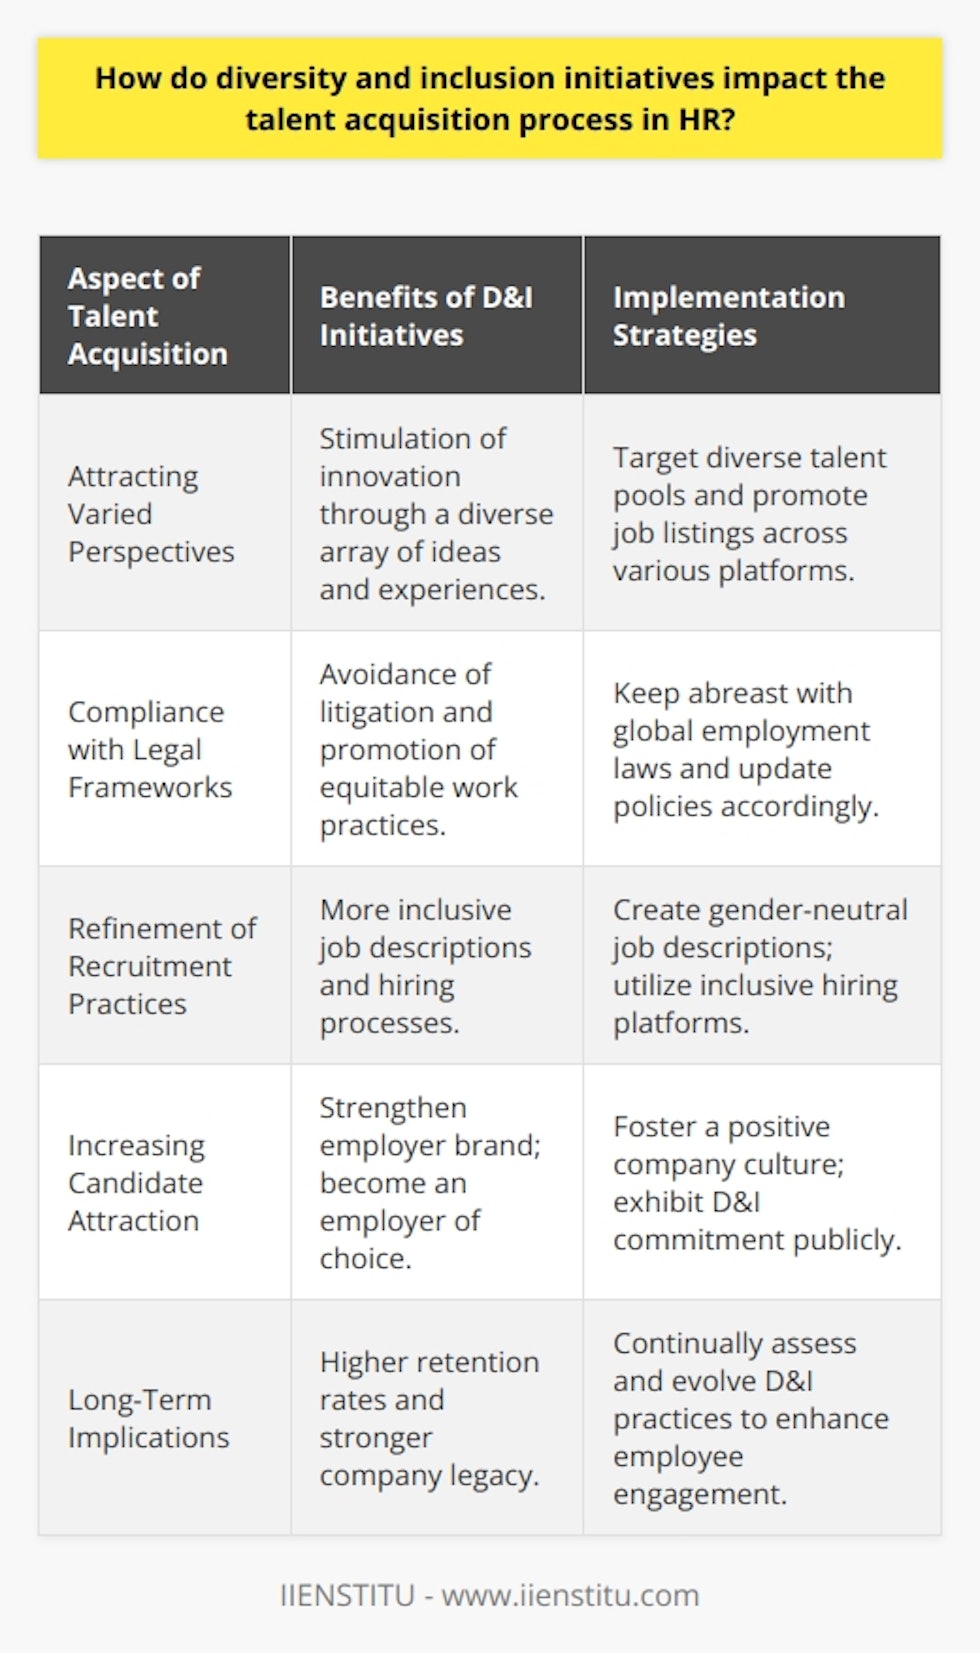 Diversity and inclusion (D&I) initiatives are no longer optional in the contemporary workplace; they are a pivotal aspect of a robust talent acquisition strategy. When HR departments integrate these initiatives into their recruitment frameworks, they transform the company's talent pipeline and foster an environment conducive to dynamic growth.Attracting Varied PerspectivesOrganizations fervently chasing innovation understand that a workforce drawn from a monochromatic segment of society stifles creativity. D&I policies ensure that companies reach out to candidates of various ethnicities, genders, orientations, socio-economic backgrounds, and neurodiversity. This rich tapestry of perspectives instigates novel solutions and drives innovation from within.Compliance with Legal FrameworksAcross the globe, companies must contend with a labyrinth of employment laws promoting workplace diversity. By implementing effective D&I initiatives, HR departments ensure adherence to these legal requirements, thus avoiding costly litigations or penalties. Moreover, they pave the way for an equitable work environment that naturally draws in a diverse talent base.Refinement of Recruitment PracticesTalent acquisition under the aegis of D&I involves much more than sifting through a heterogeneous stack of resumes. Modern recruitment practices, inspired by D&I, leverage new hiring platforms and networking events that appeal to candidates from divergent walks of life. Furthermore, these policies shape job descriptions that are meticulously crafted to be gender-neutral and inclusive, devoid of vernacular that may deter any segment of the job-seeking populace.Increasing Candidate Attraction through InclusionCandidates today scrutinize the company culture and ethos as much as the role they apply for. A firm’s dedication to D&I is often gauged through its presence on social media, its community outreach programs, and its internal culture. For instance, workplace flexibility, support networks, and inclusive health benefits are magnetic to potential hires who seek a nurturing and accepting work environment. Consequently, the company becomes an employer of choice, with a surplus of qualified applicants desirous to join its ranks.Long-Term ImplicationsWhile the immediate goal of D&I initiatives is to hire a multifaceted workforce, the long-term impact cannot be overstated. The retention rates soar as employees who see themselves represented and their contributions valued are likely to exhibit a greater sense of loyalty and job satisfaction. Moreover, as the talent acquisition process becomes more attuned to inclusivity, the legacy of a company grows in parallel, drawing more customers and clients who prioritize working with firms championing diversity and equity.In an era where the workforce is its greatest asset, the influence of diversity and inclusion on talent acquisition is not just beneficial—it is transformative. Companies that integrate inclusivity into their recruitment toolkit are likely to reap the rewards of a truly global, multi-skilled, and loyal employee base. It is a strategic imperative to embrace these initiatives and harness the plethora of benefits they wield in the talent acquisition process. Through dedicated D&I policies, HR departments architect the future, crafting a corporate world representative of the rich heterogeneity of the world at large.